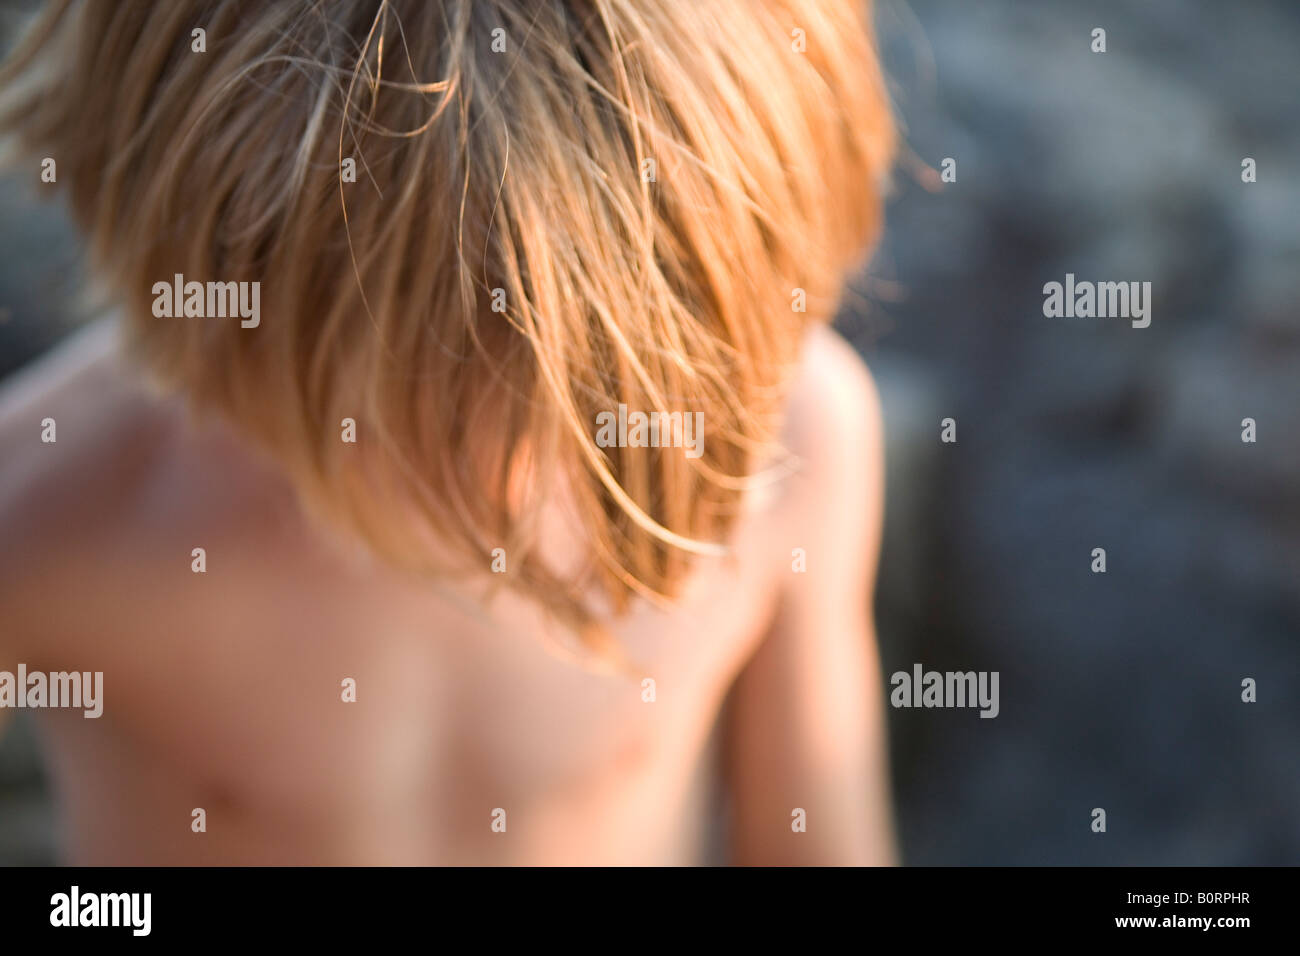 young boy with head down shows hair in warm sunlight 8 years old Stock Photo